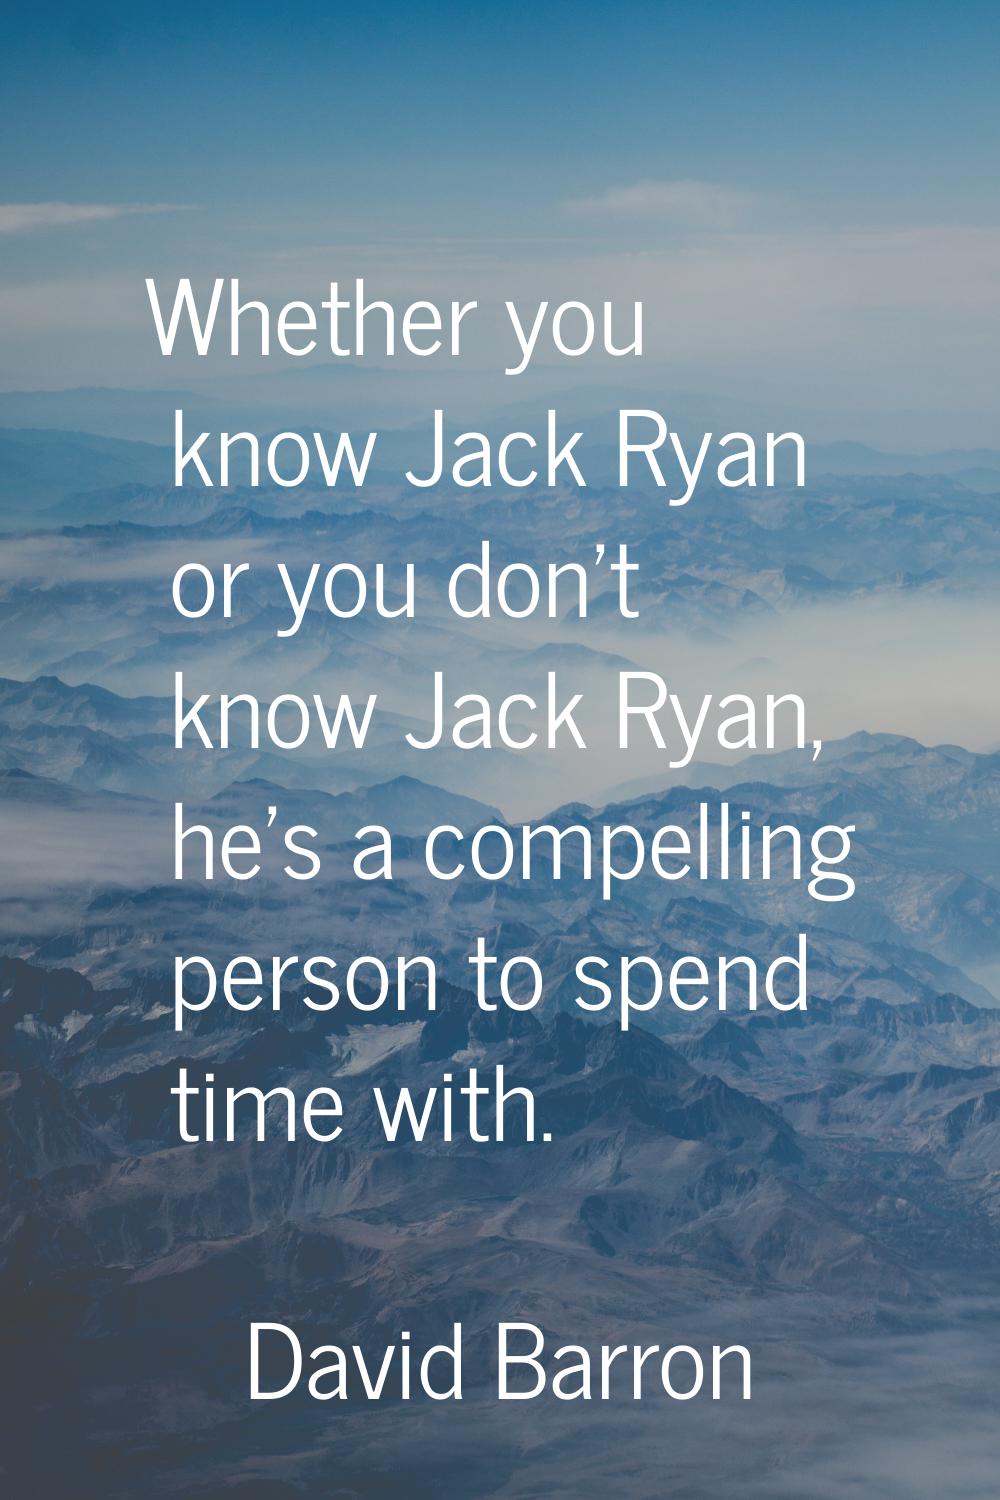 Whether you know Jack Ryan or you don't know Jack Ryan, he's a compelling person to spend time with